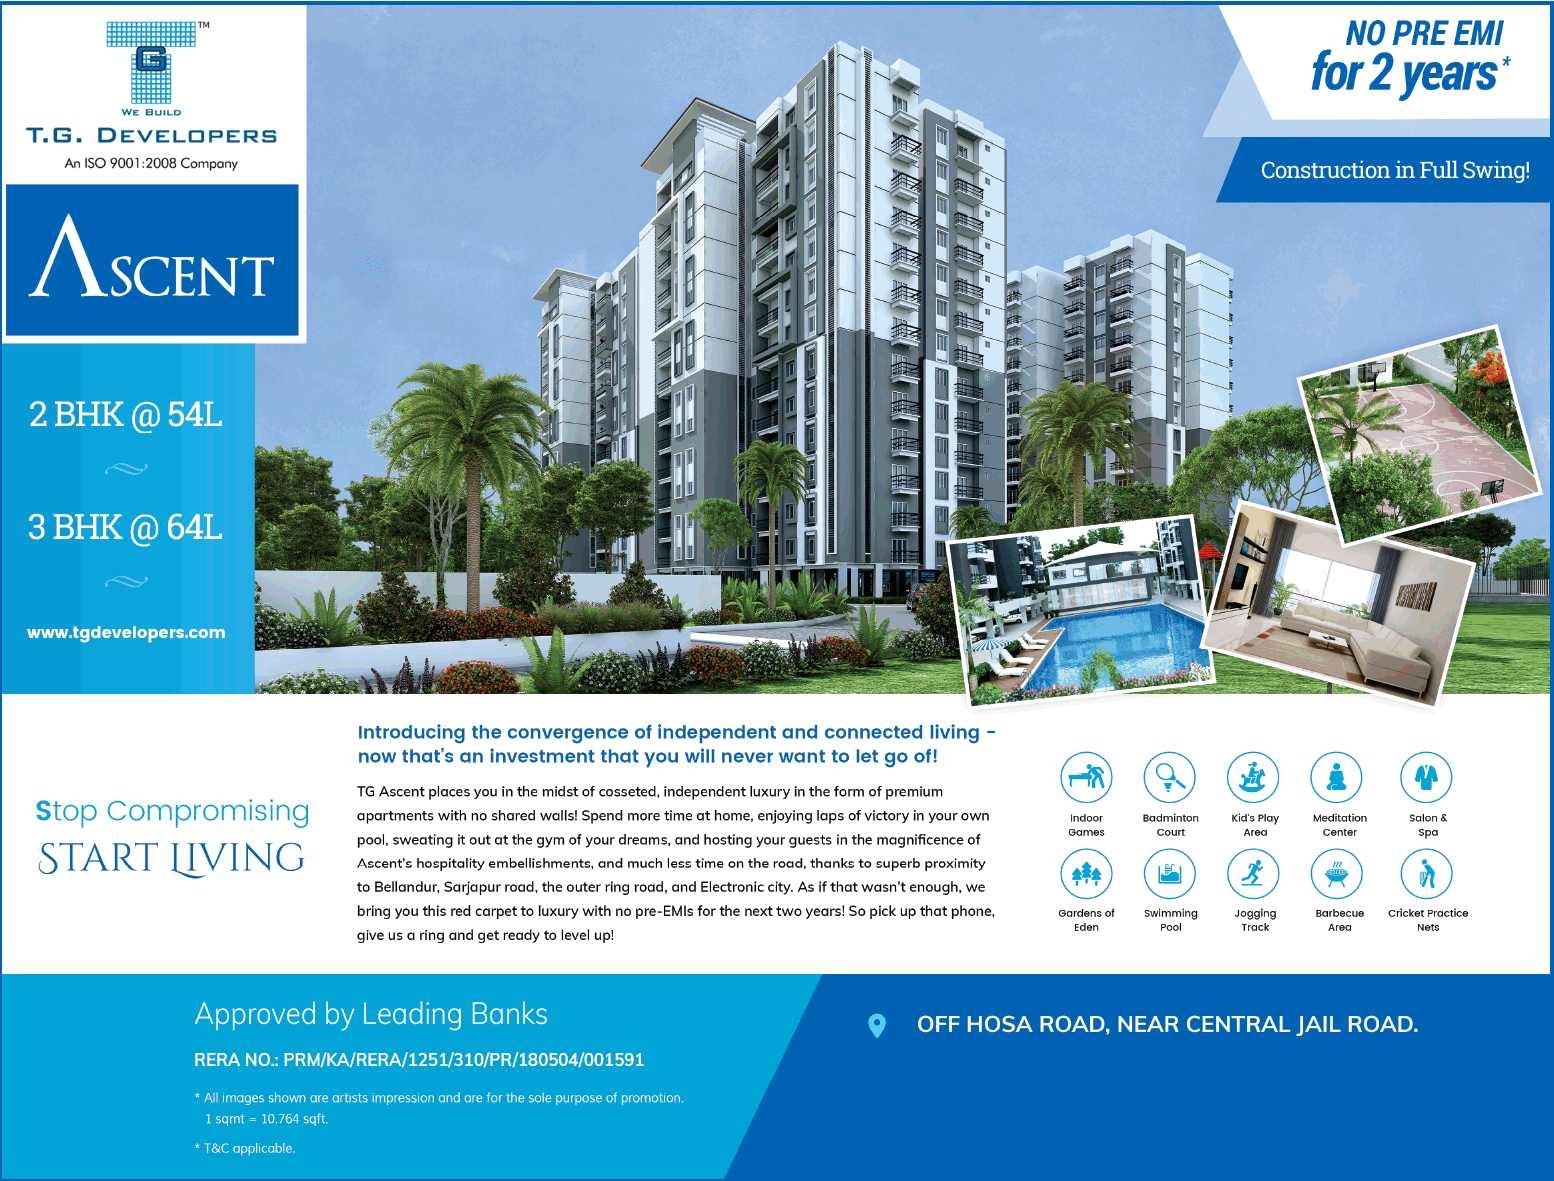 Introducing the convergence of independent & connected living at TG Ascent in Bangalore